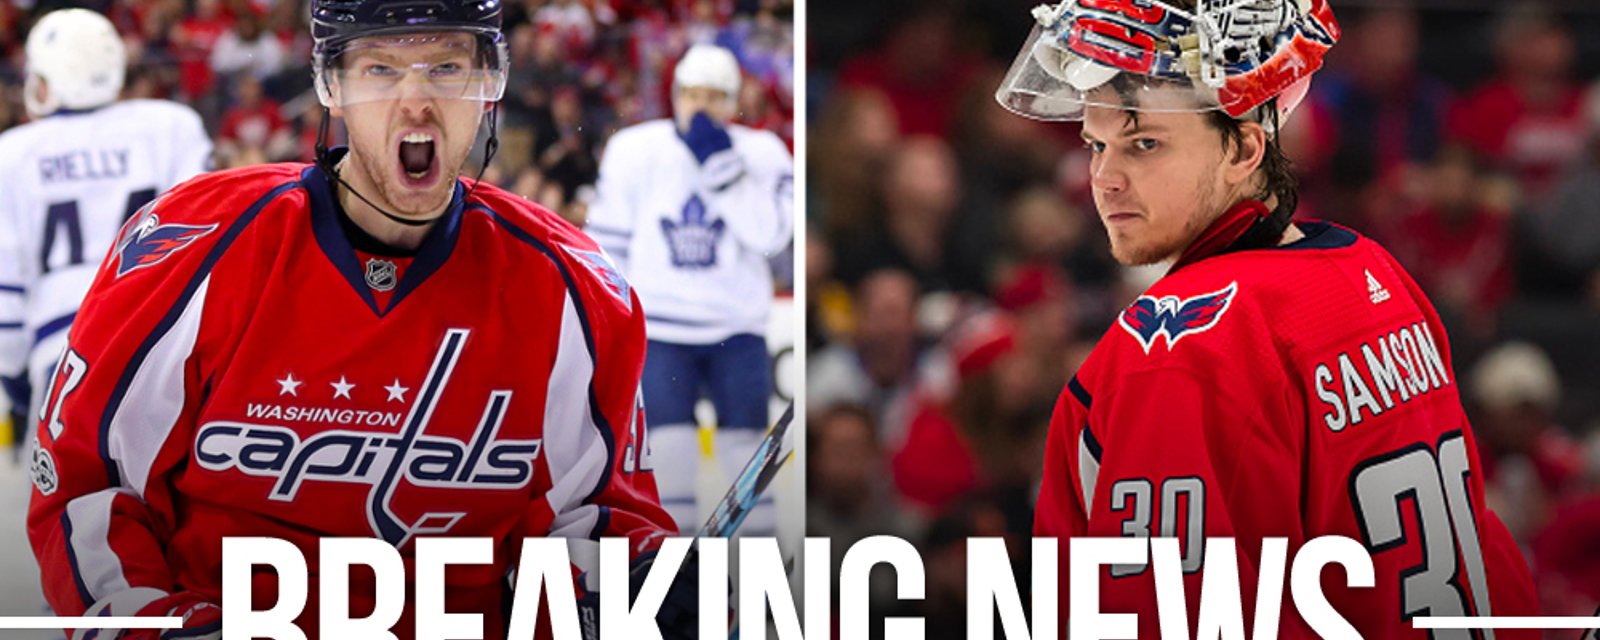 Kuznetsov and Samsonov pulled from Capitals lineup for “disciplinary reasons”